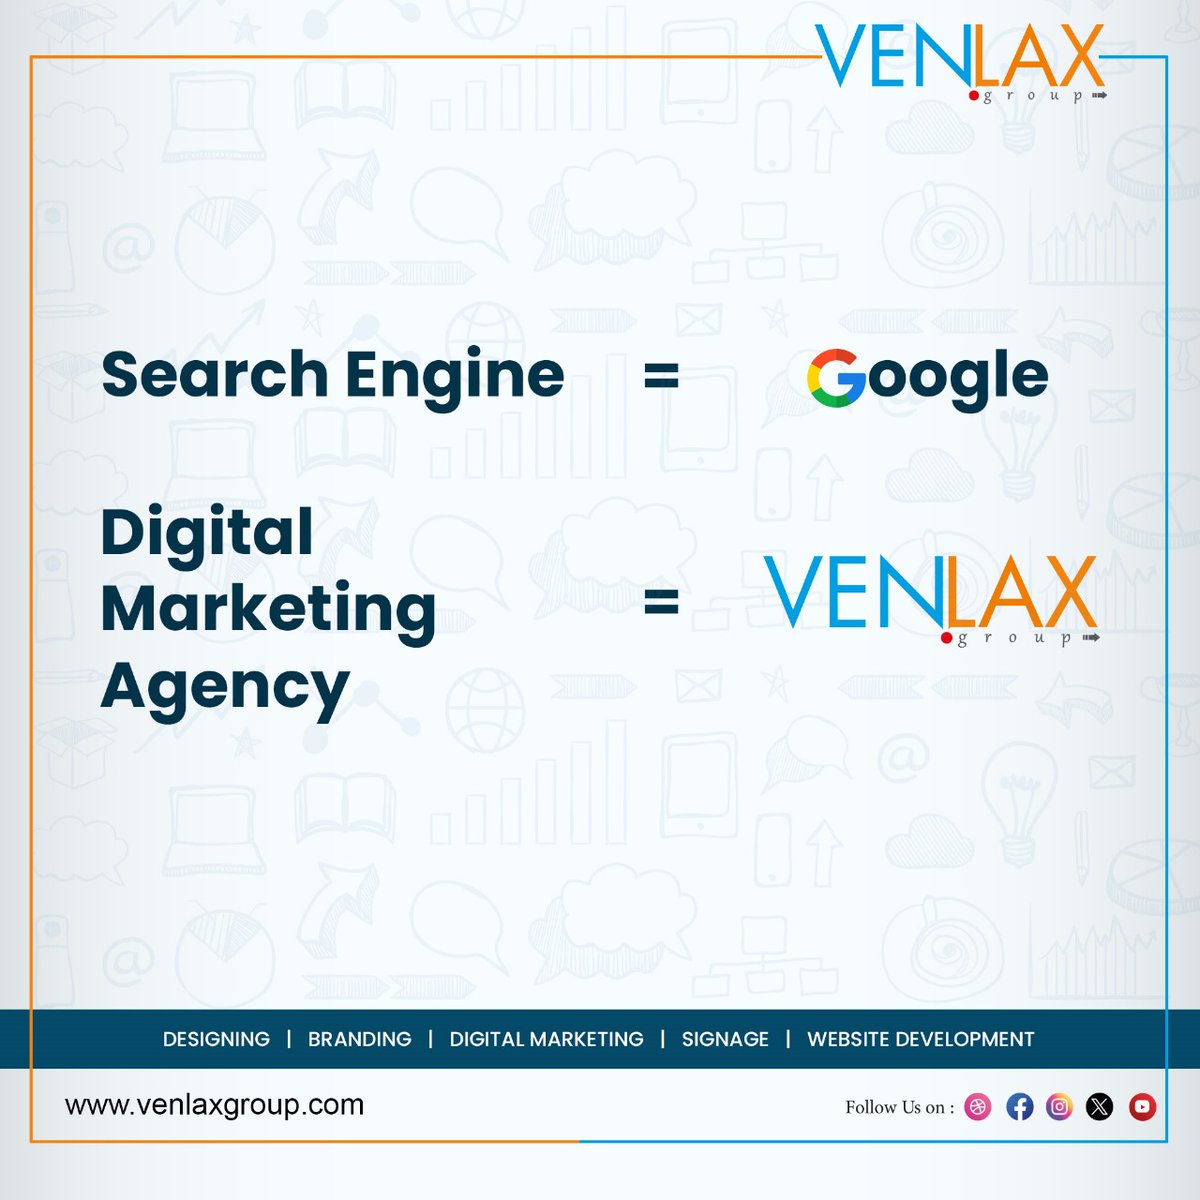 Boost your online presence with Venlax, the digital marketing agency trusted by businesses worldwide. Let us optimize your visibility on Google and drive traffic to your website. 

For More Information
Call:9515 288 288
#VenlaxGroup #GoogleSEO #DigitalMarketing #VenlaxAgency